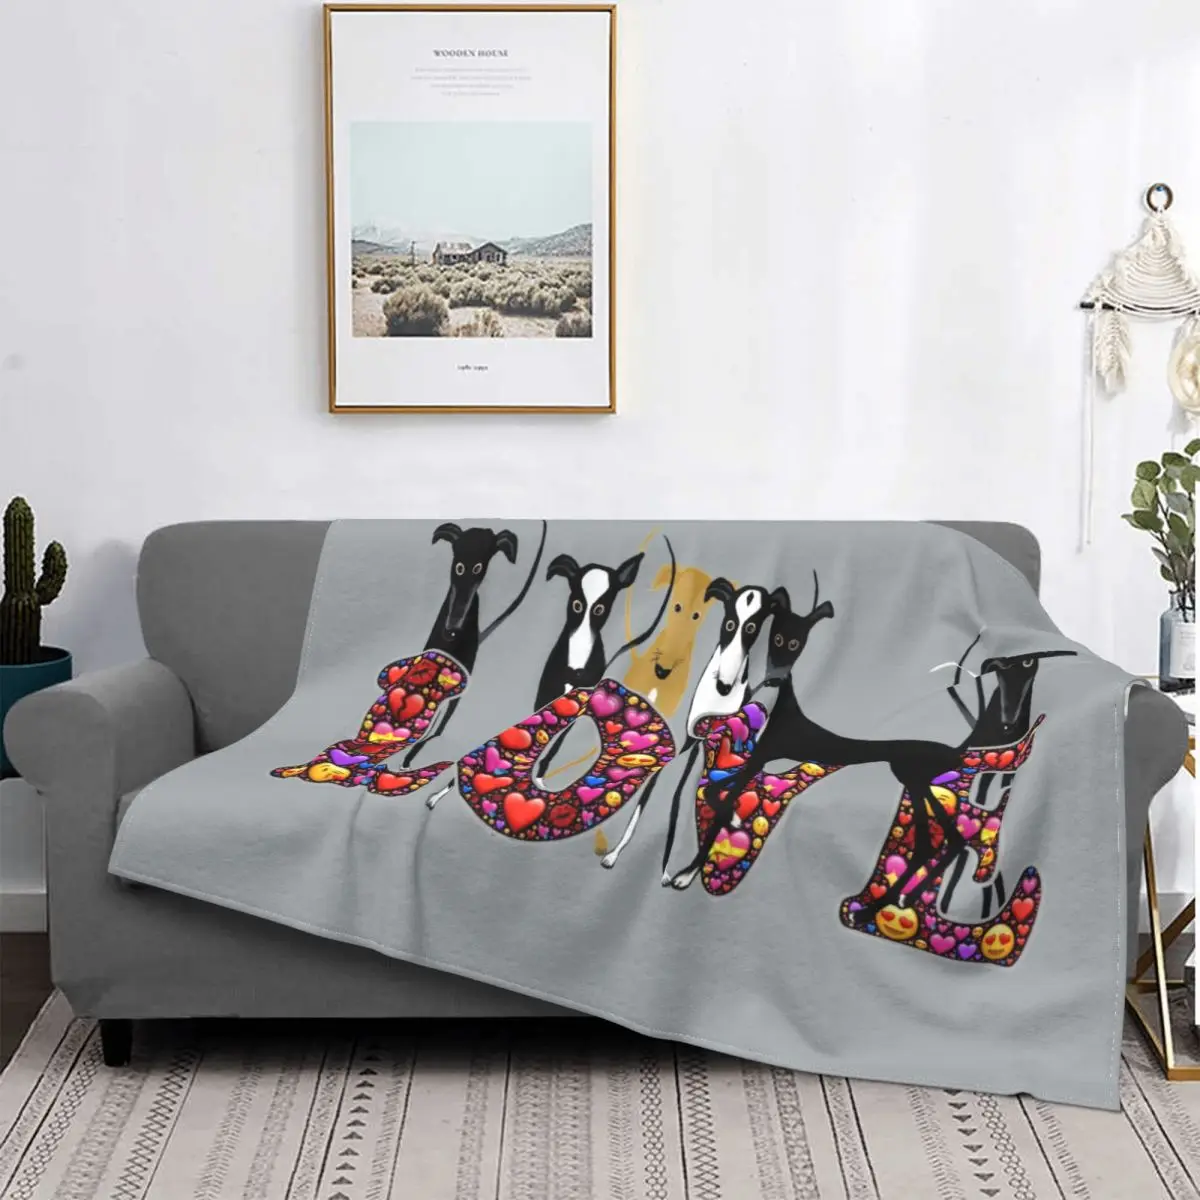 

Ultra-Soft Fleece Love Hounds Throw Blanket Flannel Greyhound Whippet Sighthound Dog Blankets for Bed Office Couch Bedspreads